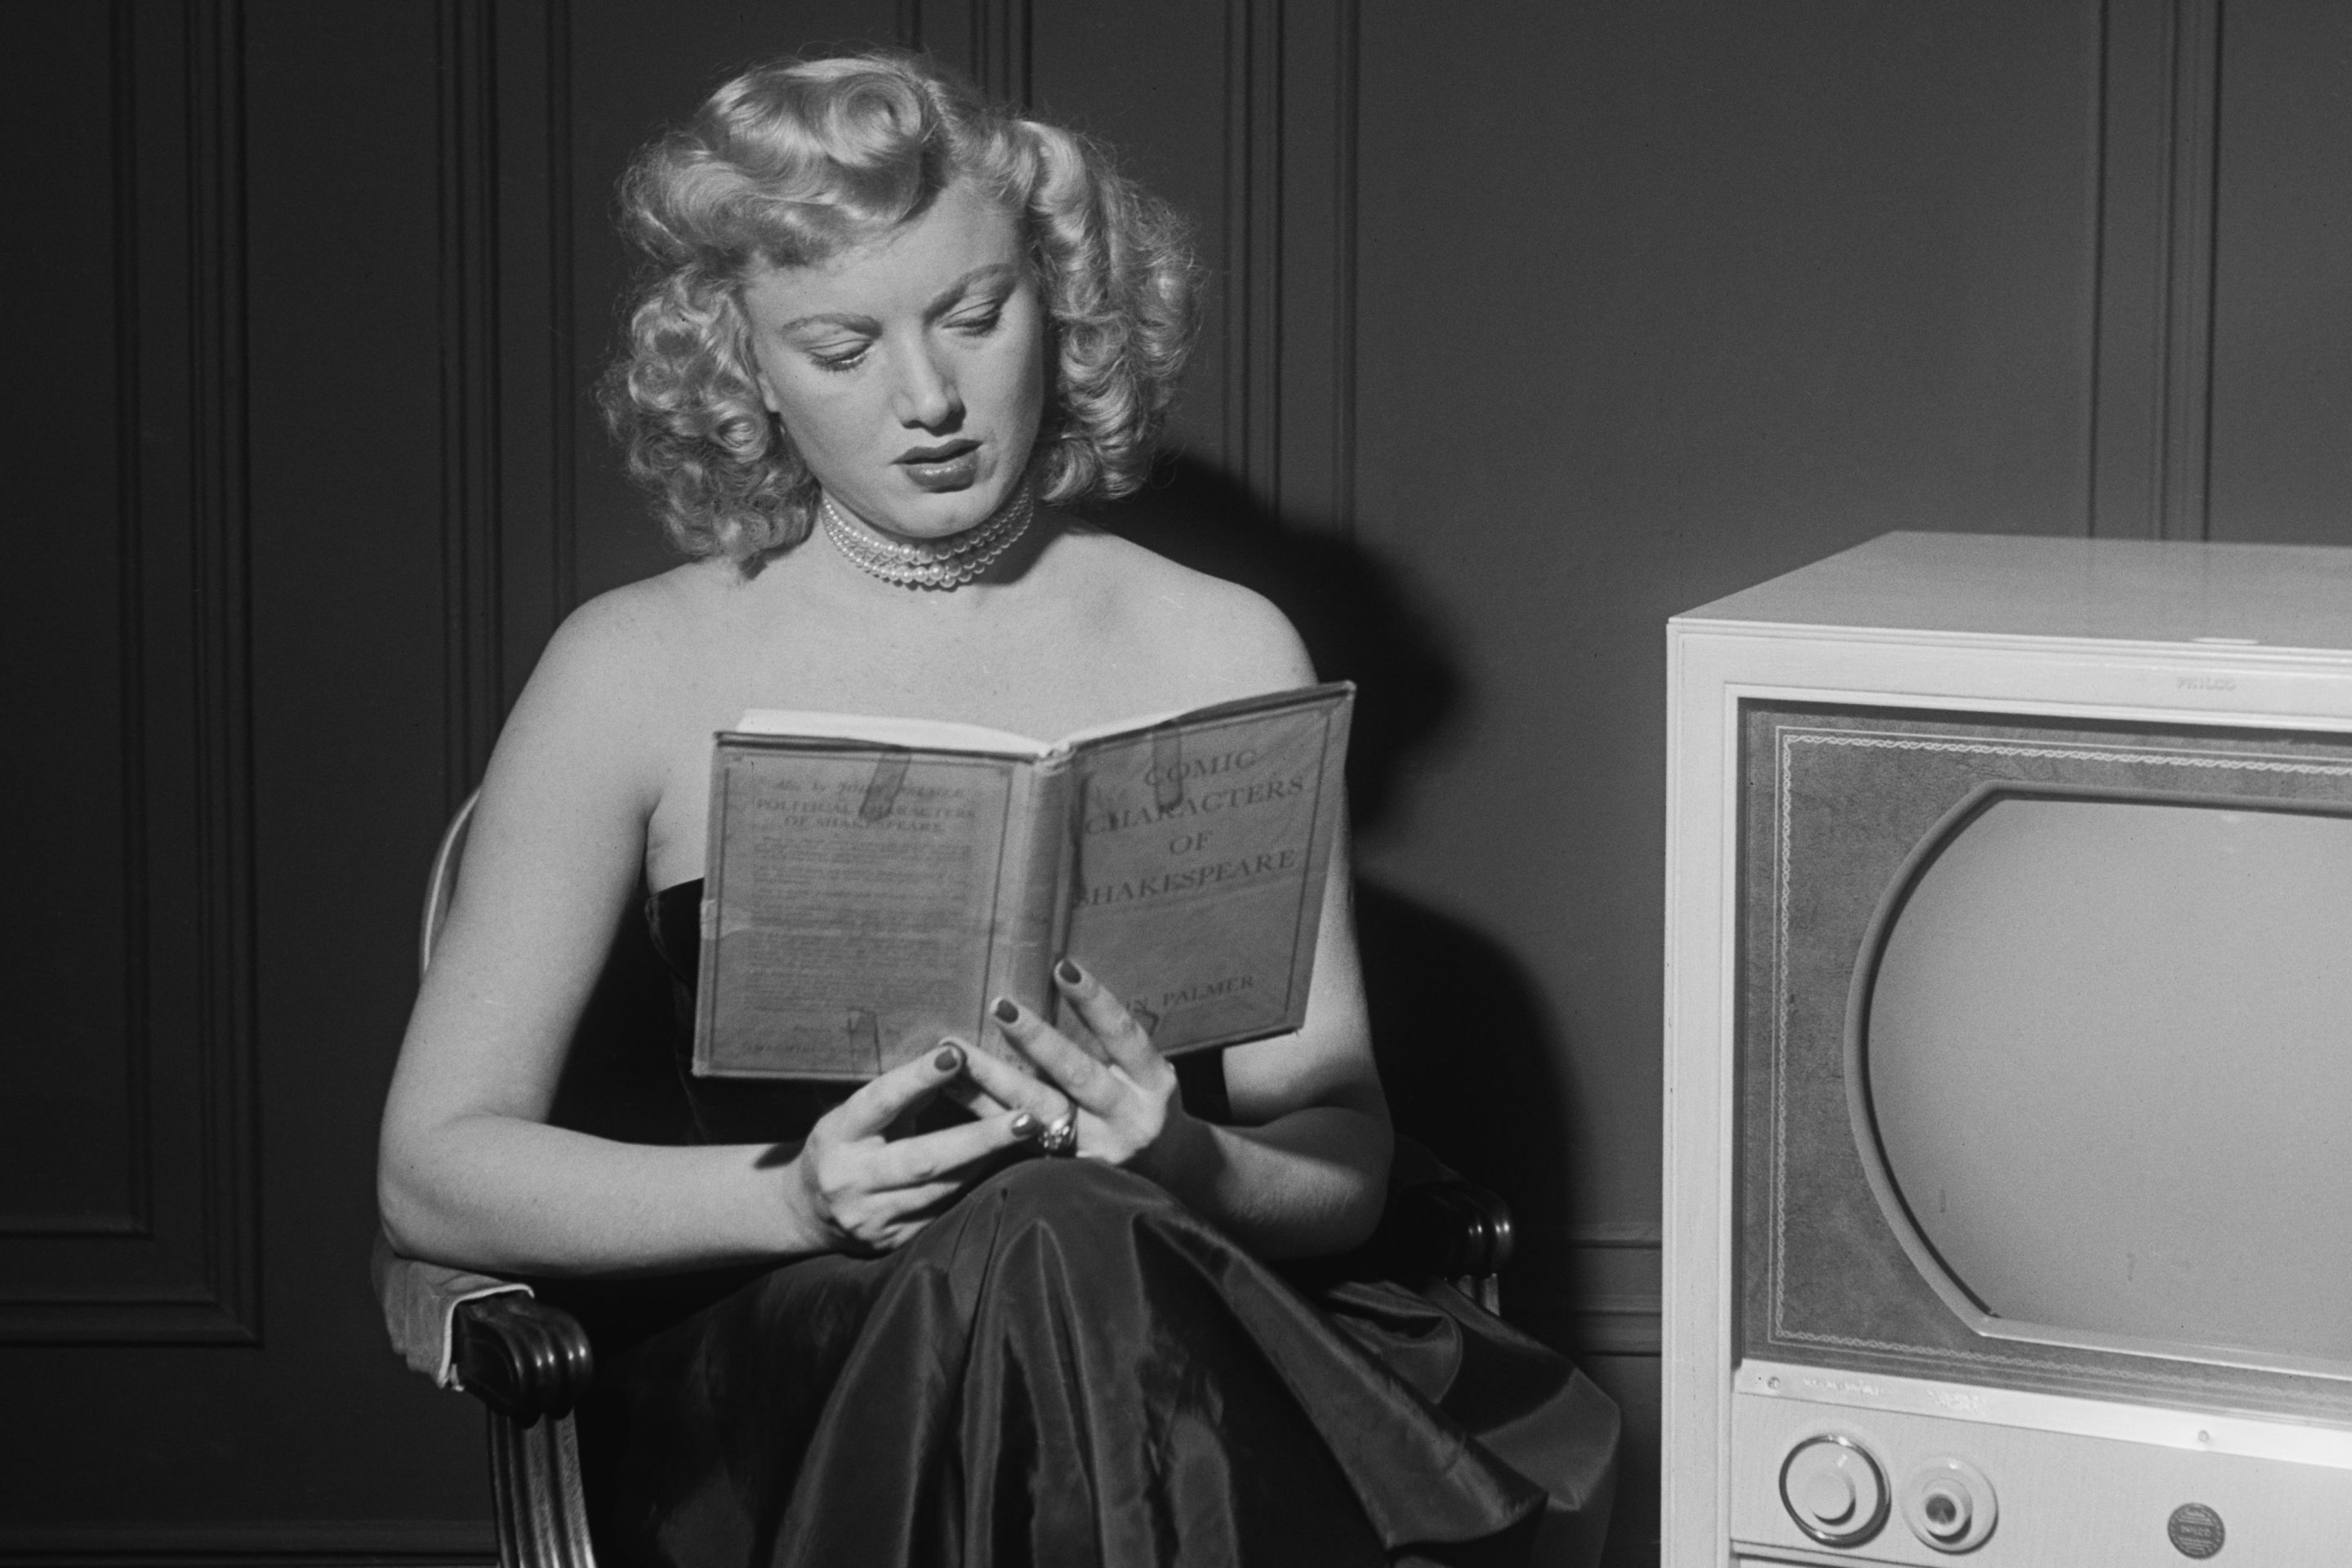 Actress Dagmar reads book beside TV in old black and white photo